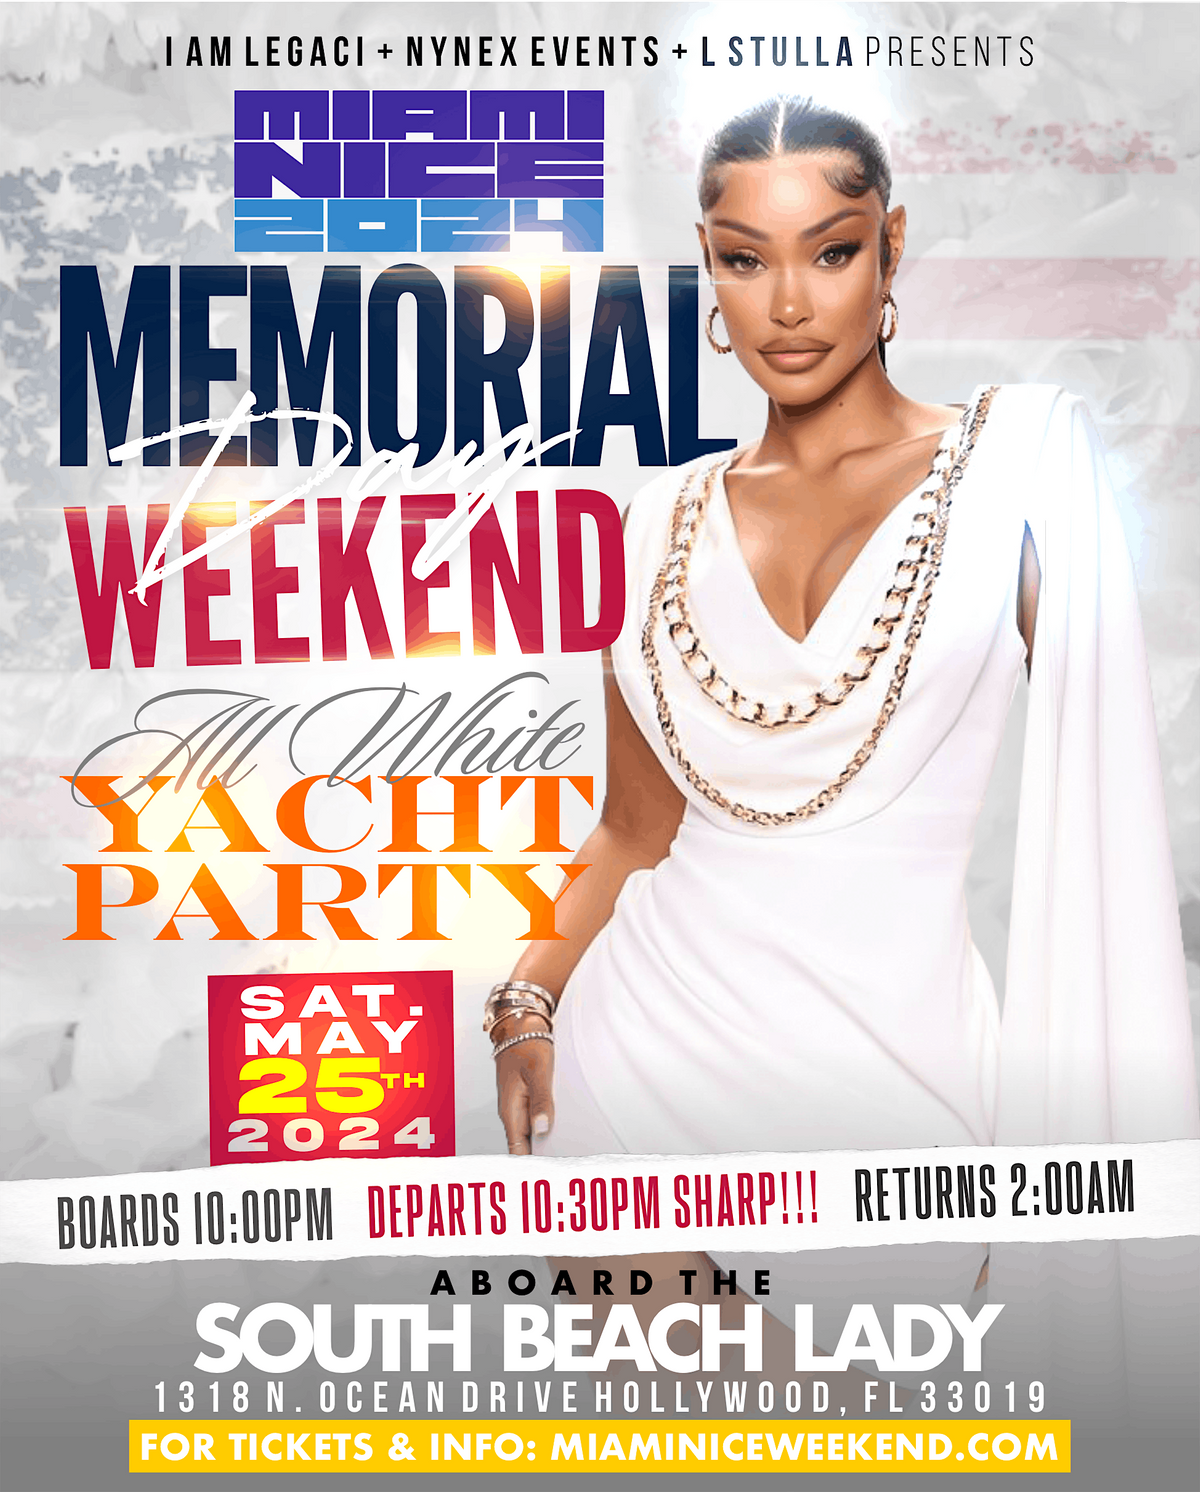 MIAMI NICE 2024 MEMORIAL DAY WEEKEND ANNUAL ALL WHITE YACHT PARTY